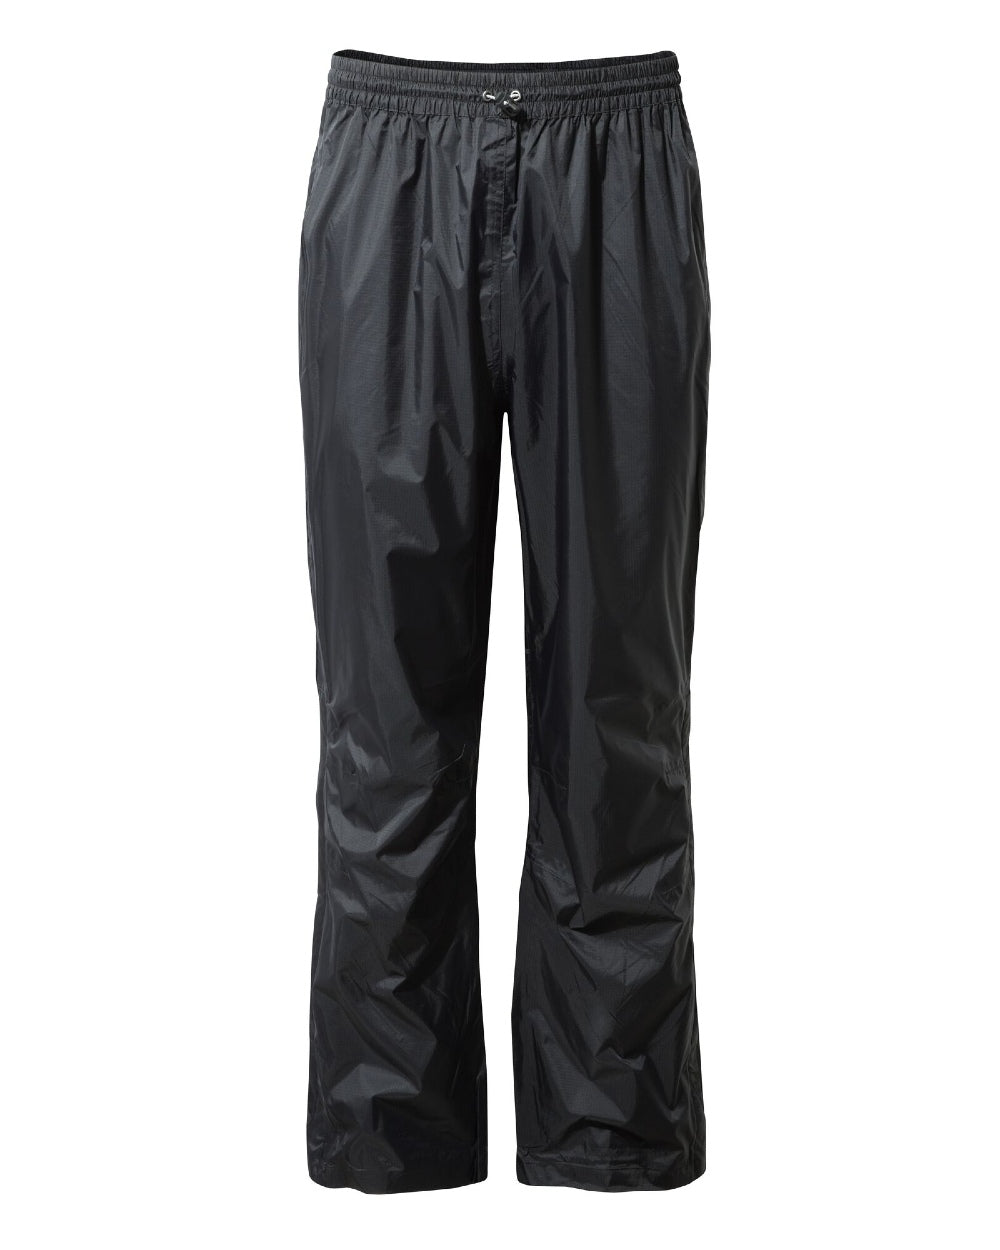 Craghoppers Ascent Waterproof Over Trousers in Black